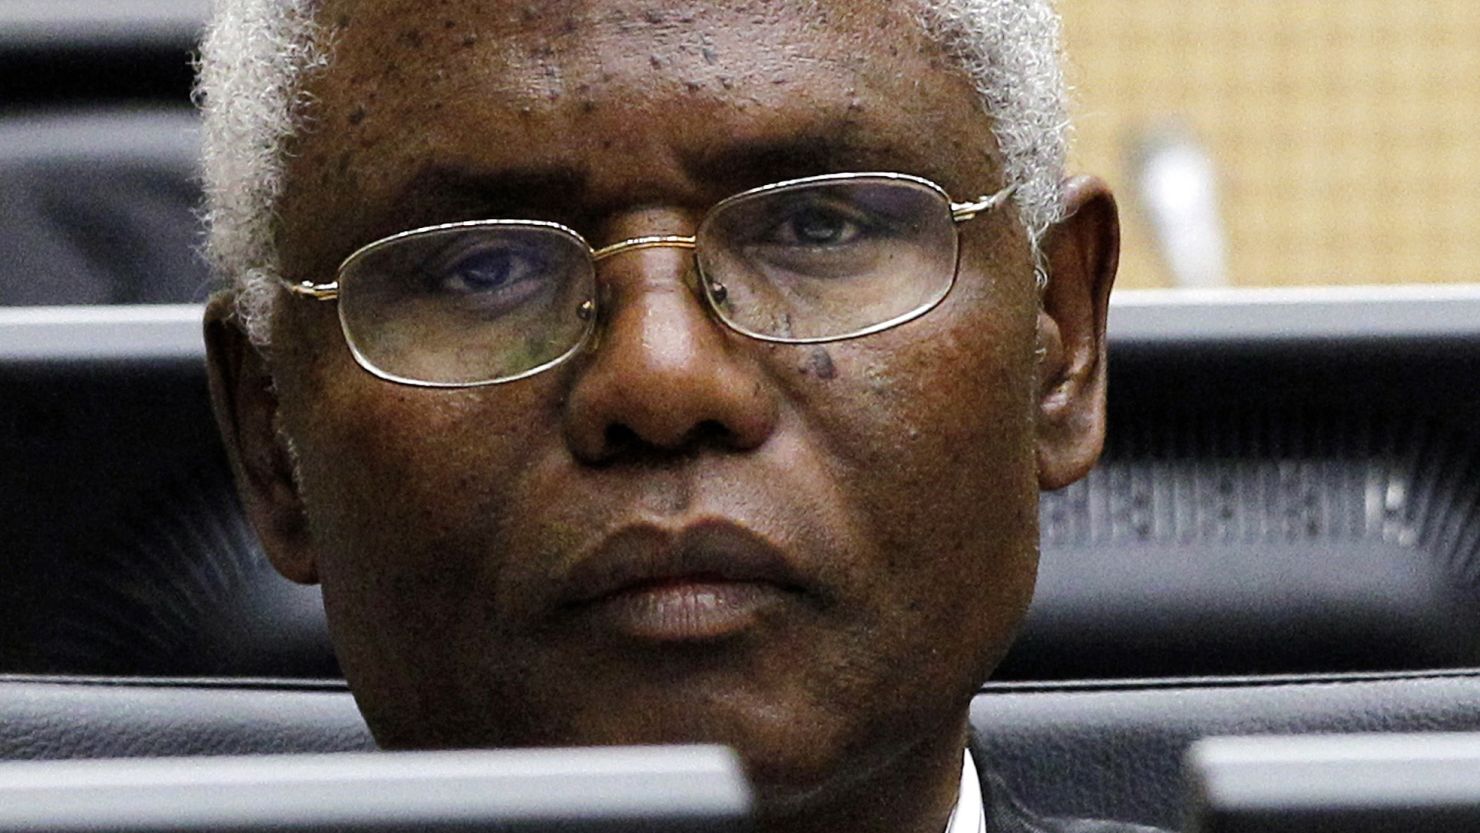 Cabinet Secretary Francis Muthaura appears at the International Criminal Court in The Hague on April 8, 2011.